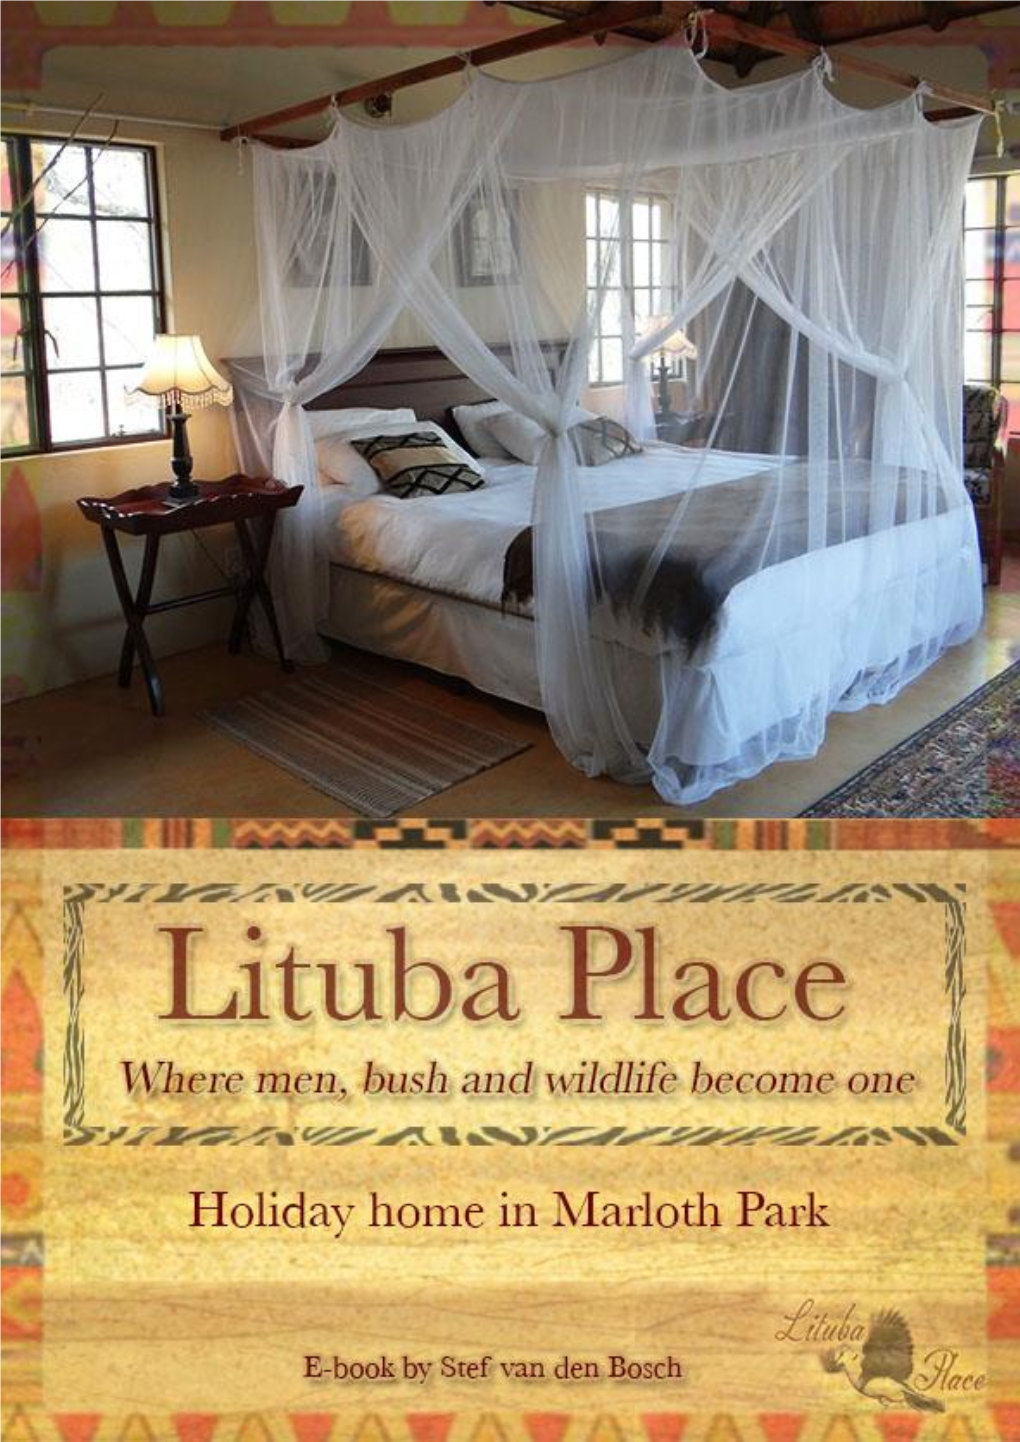 This E-Book Informs You About Your Holiday at Lituba Place. Visiting Lituba Place Will Hand You an Unforgettable Experience